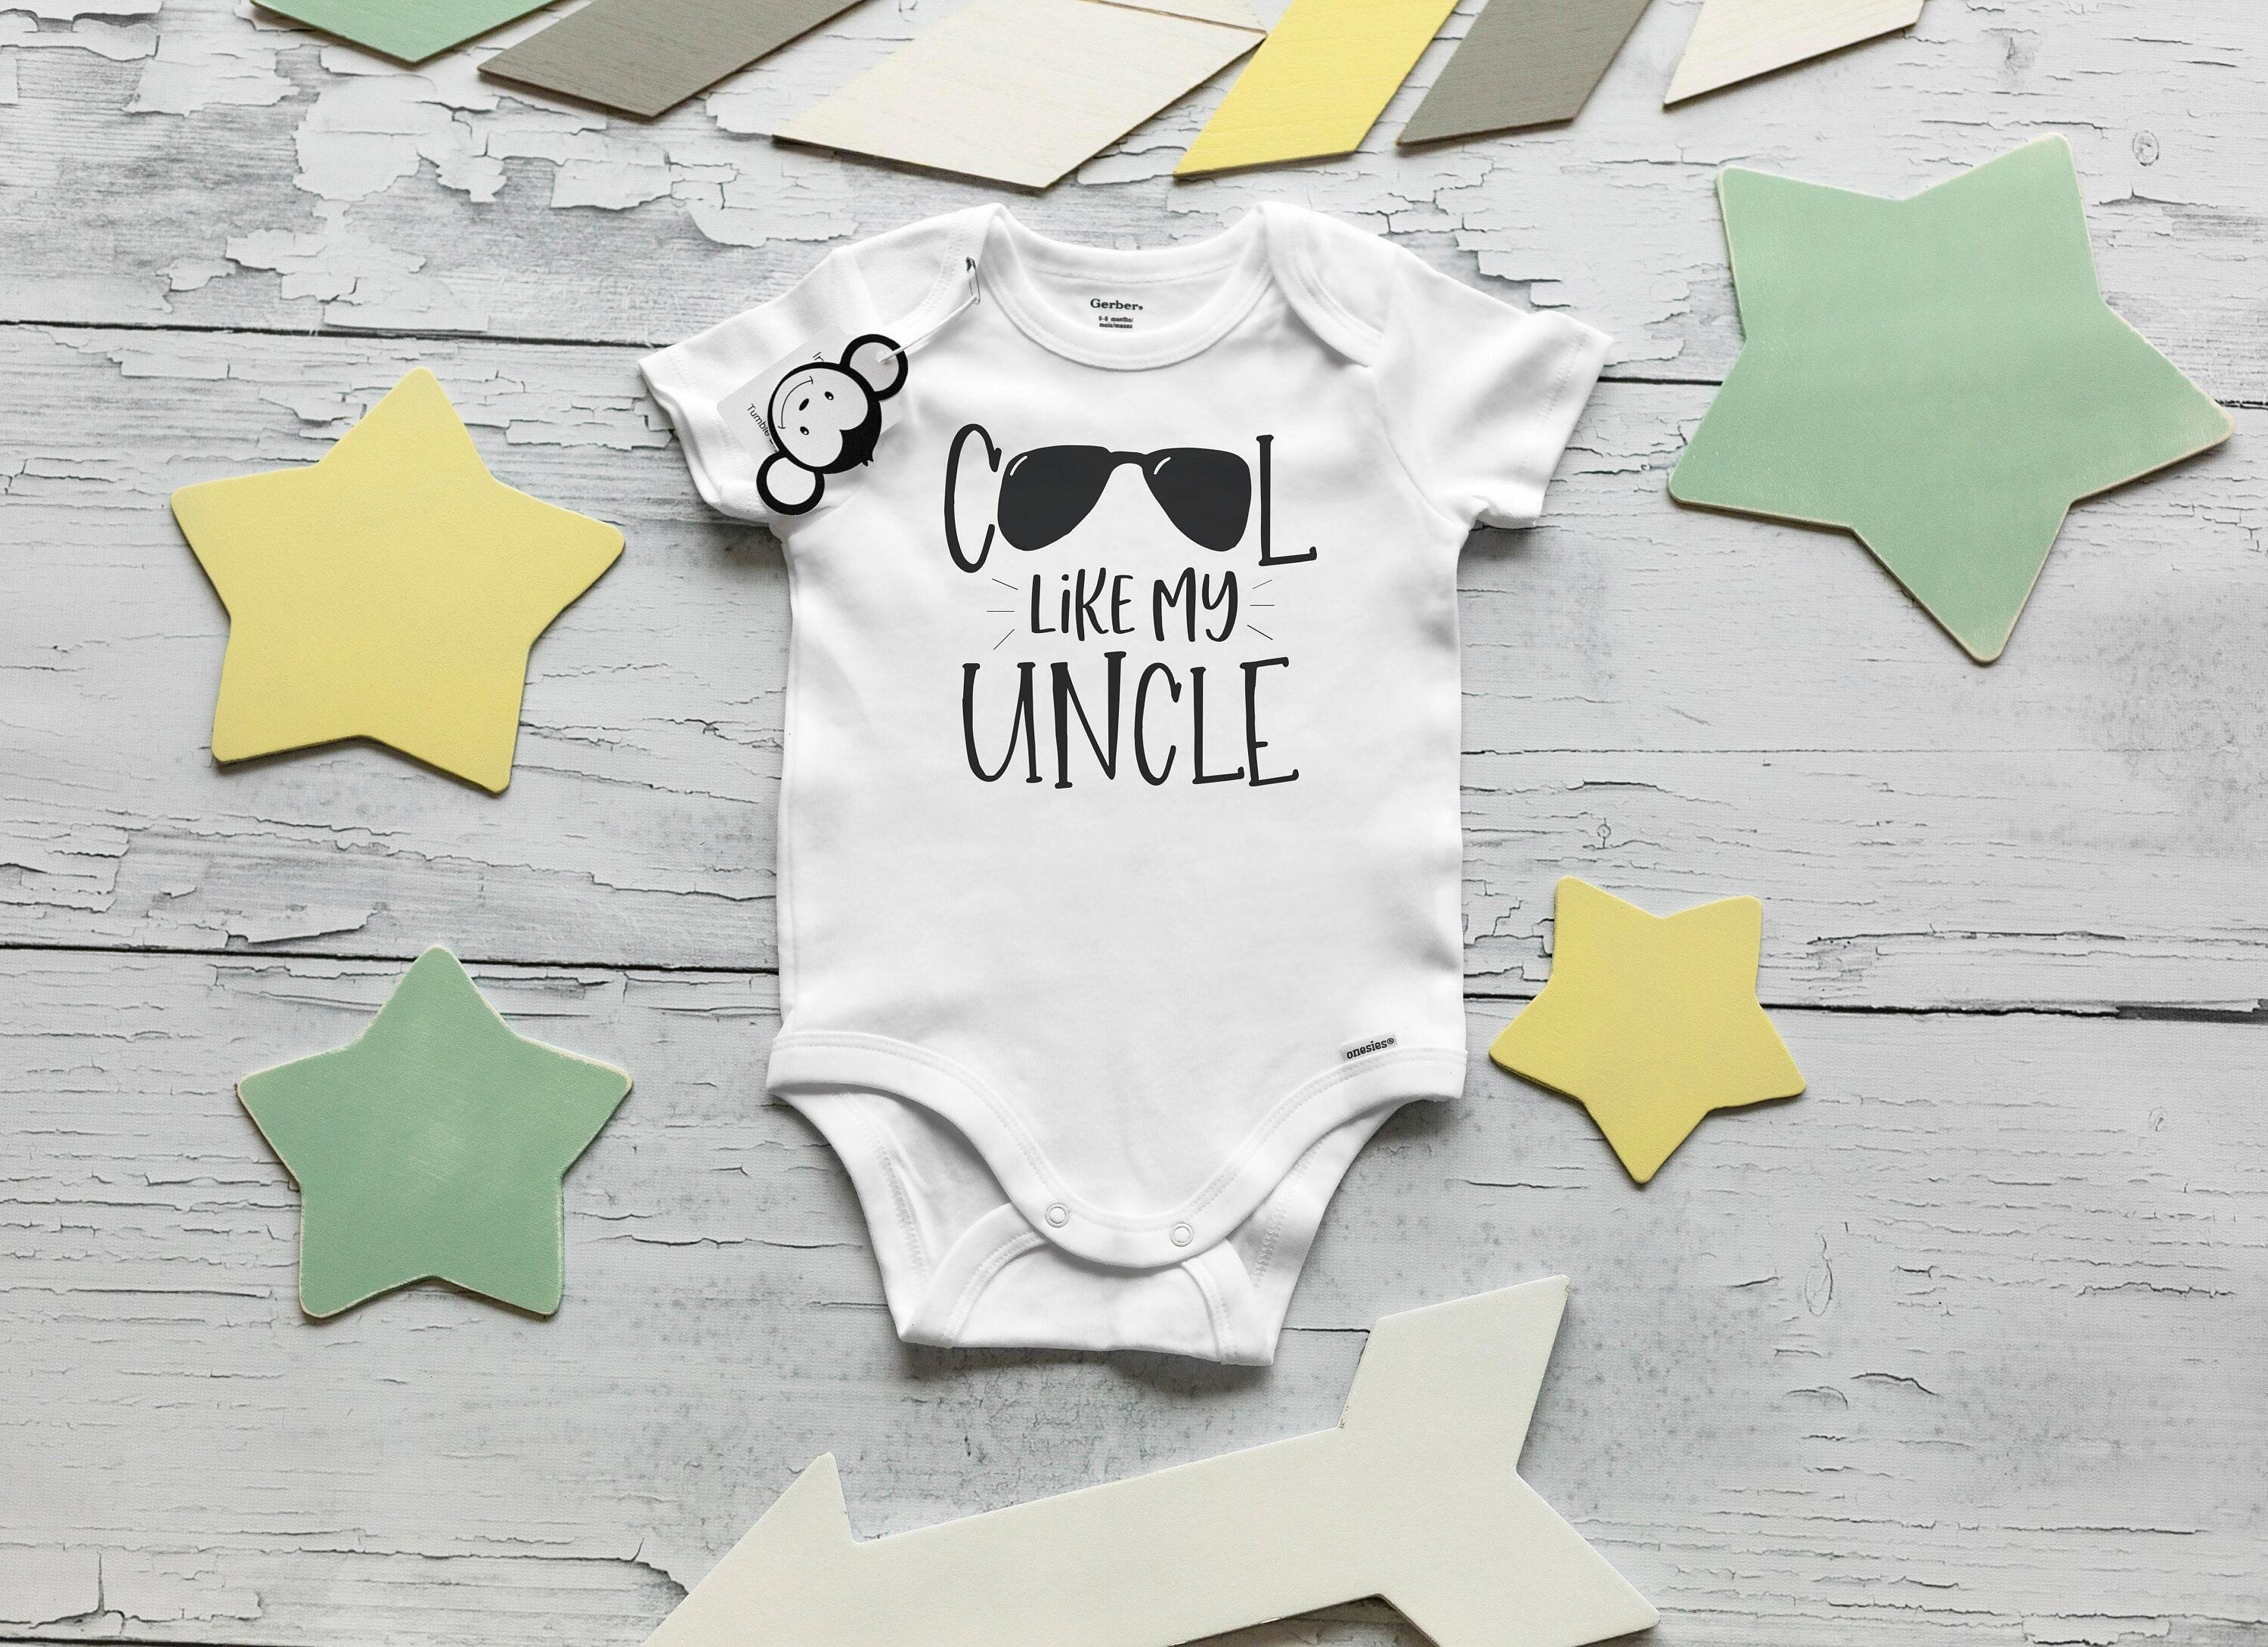 I Love Going Fishing With My Uncle Baby Bodysuit - Grey 